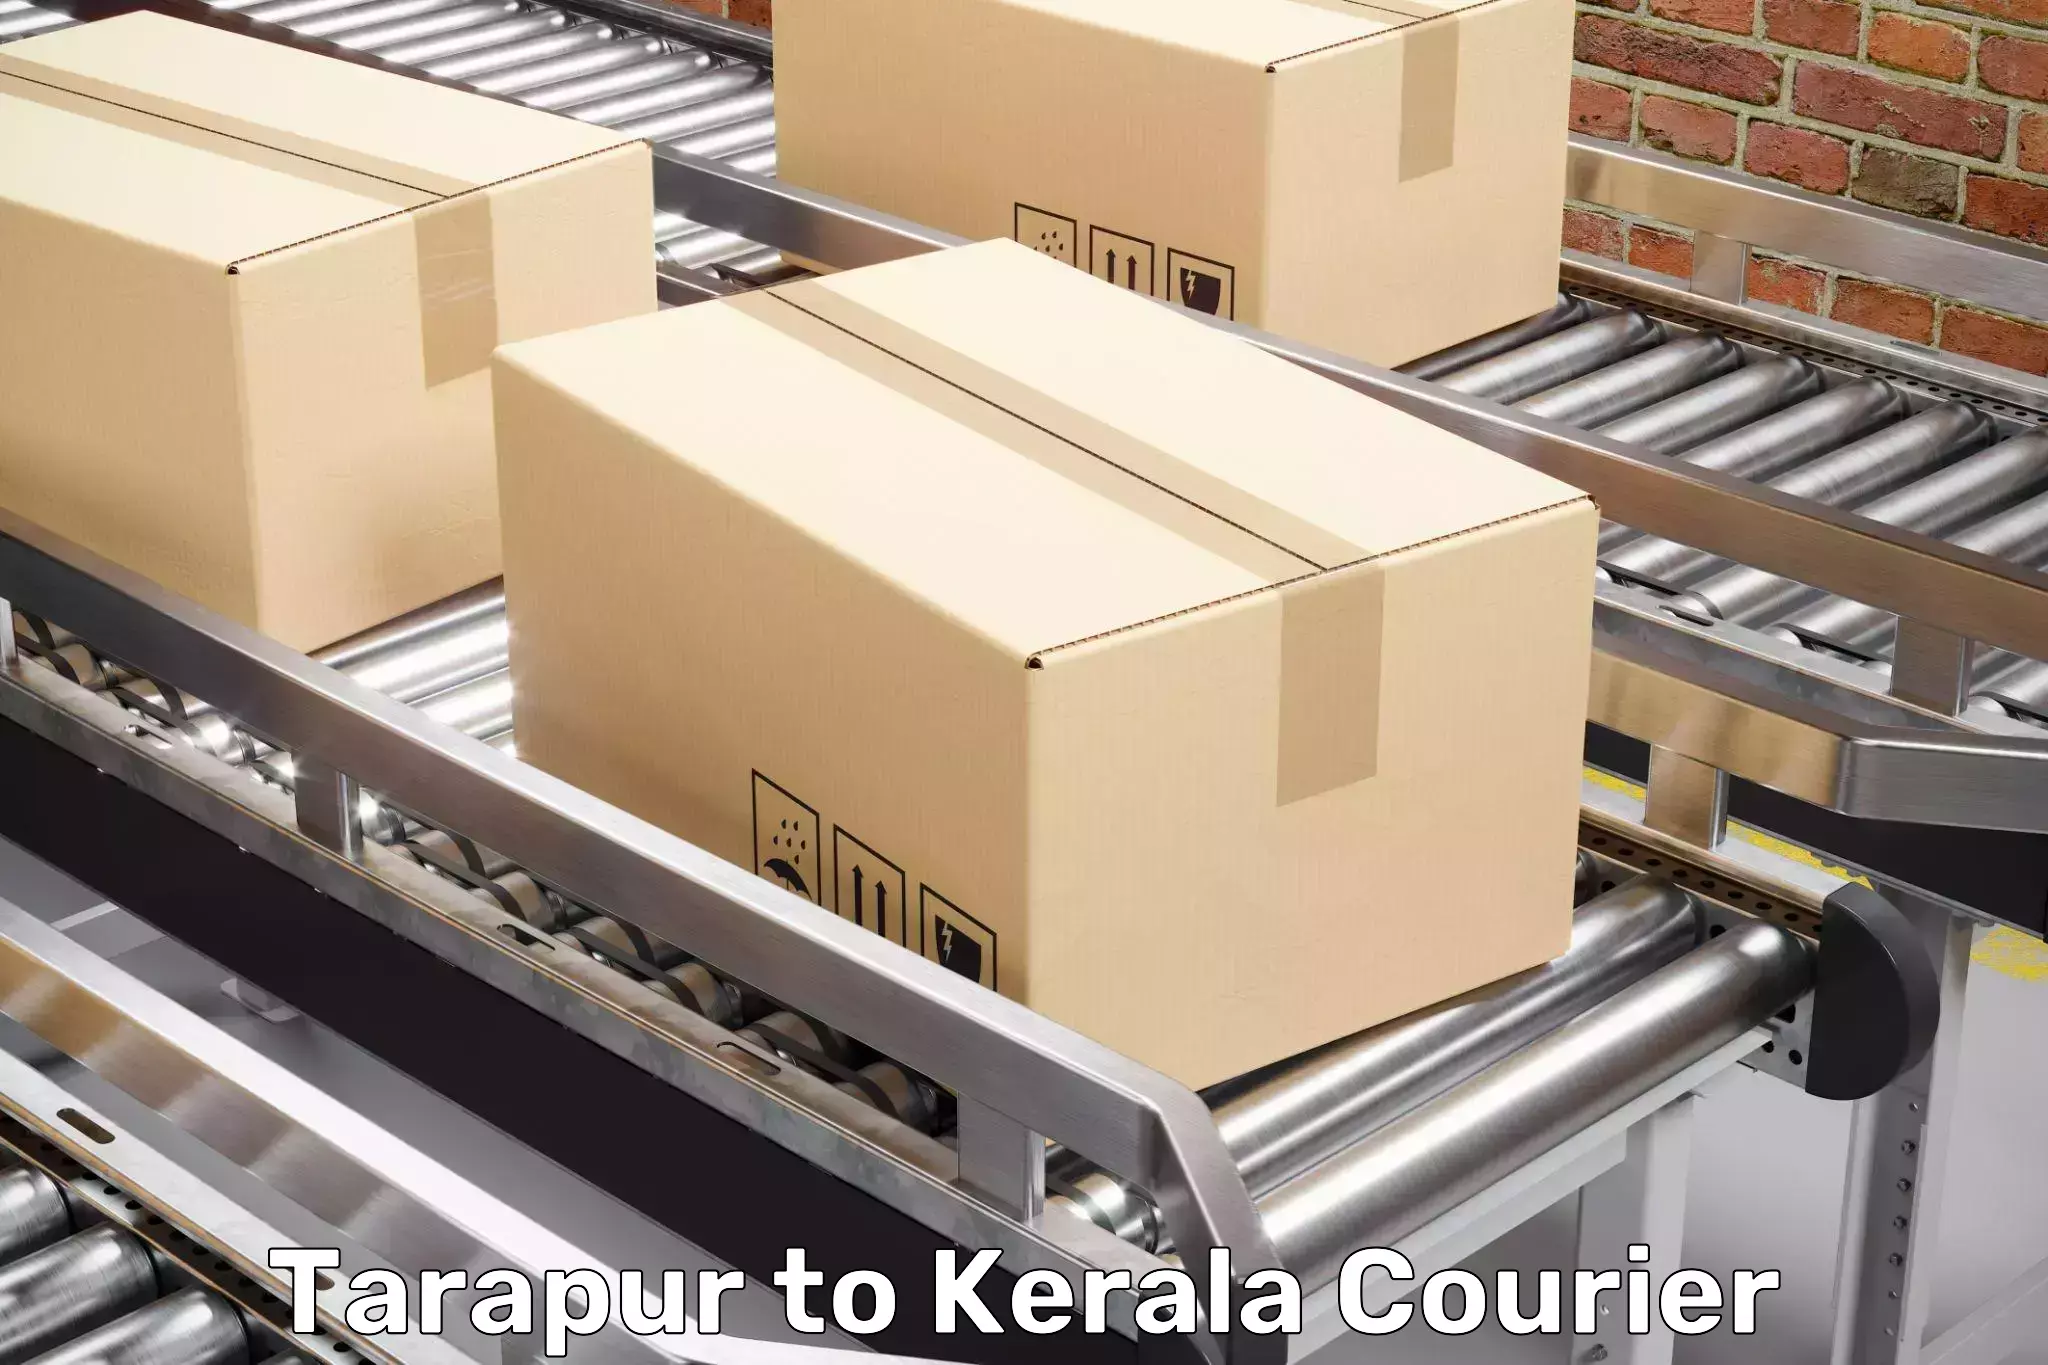 Smooth relocation services in Tarapur to Kottayam